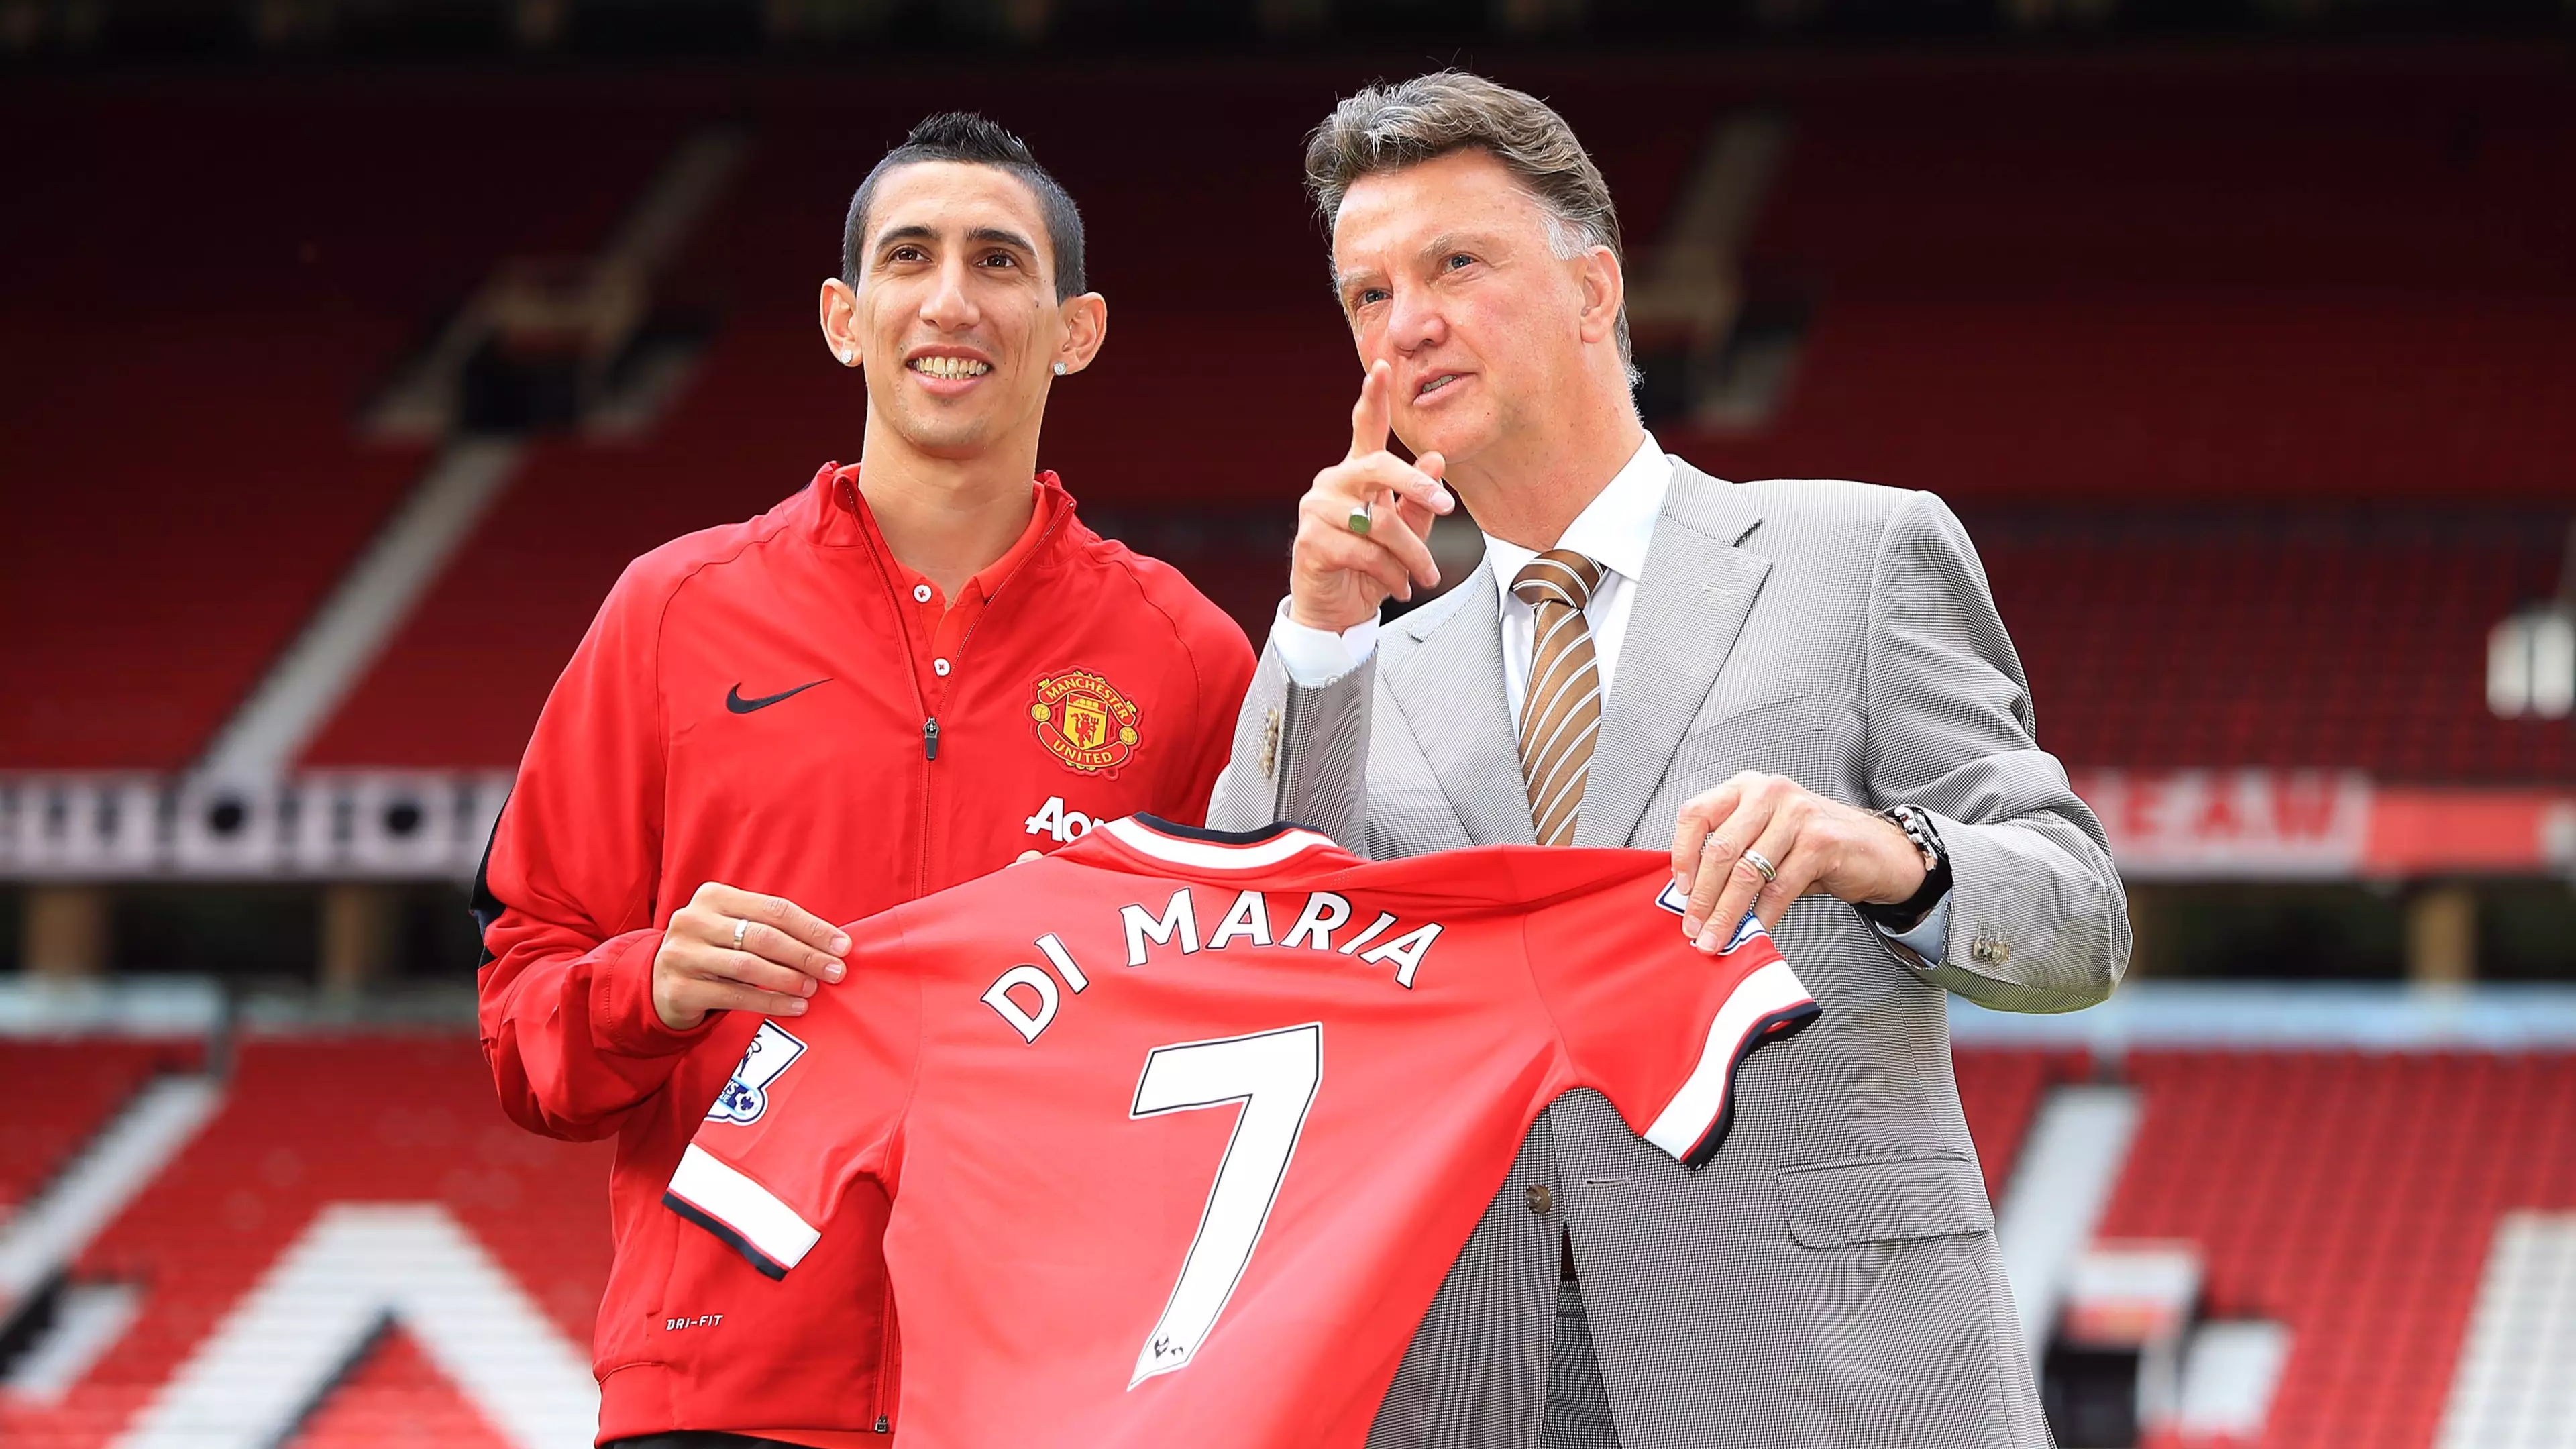 Clubs Desire To Make Money Led Di Maria To Leave United